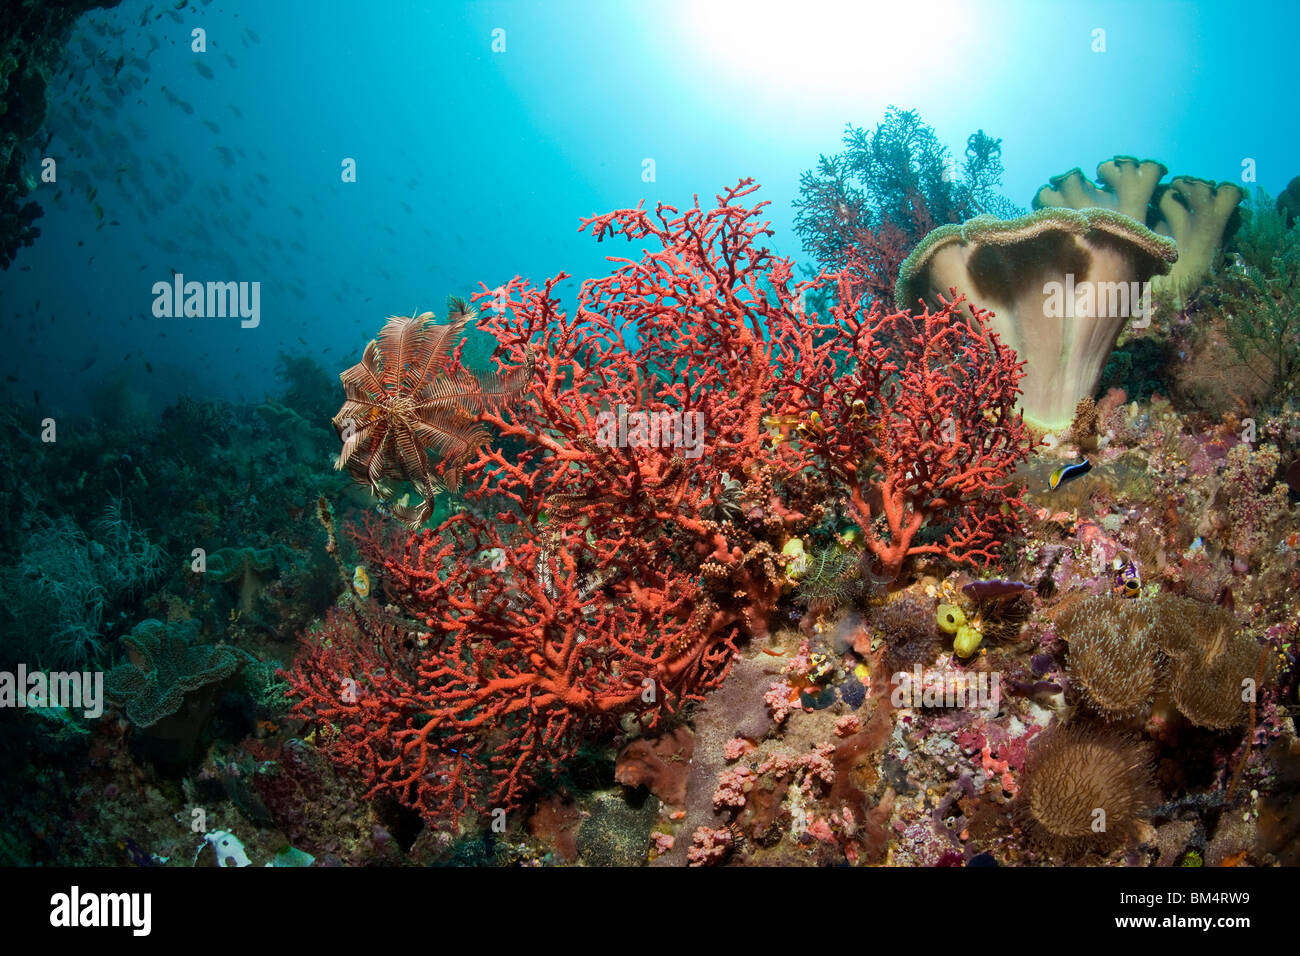 Red Sea Fan in Coral Reef, Paracis caecilia, Raja Ampat, West Papua, Indonesia Stock Photo